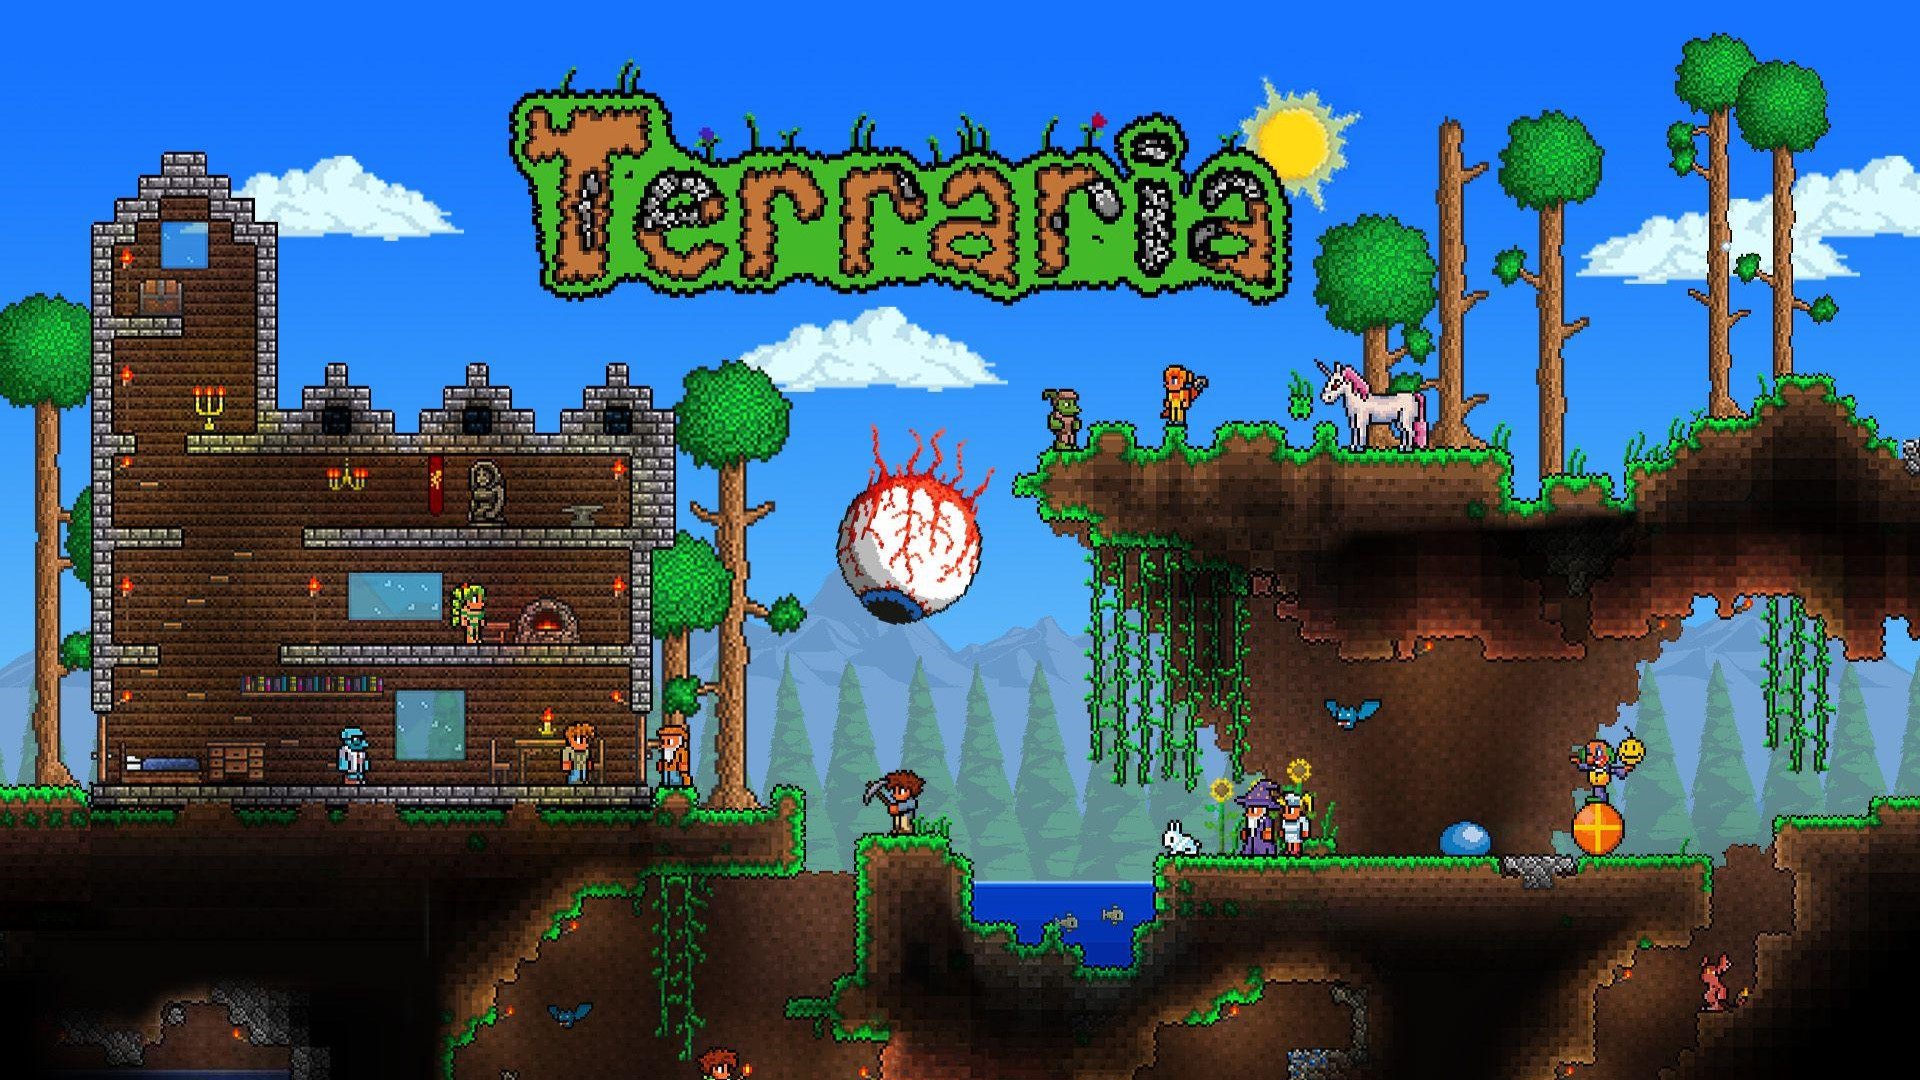 Terraria - Steam Award nominations are open through November 29th! You can  nominate Terraria today by visiting our Steam Store page